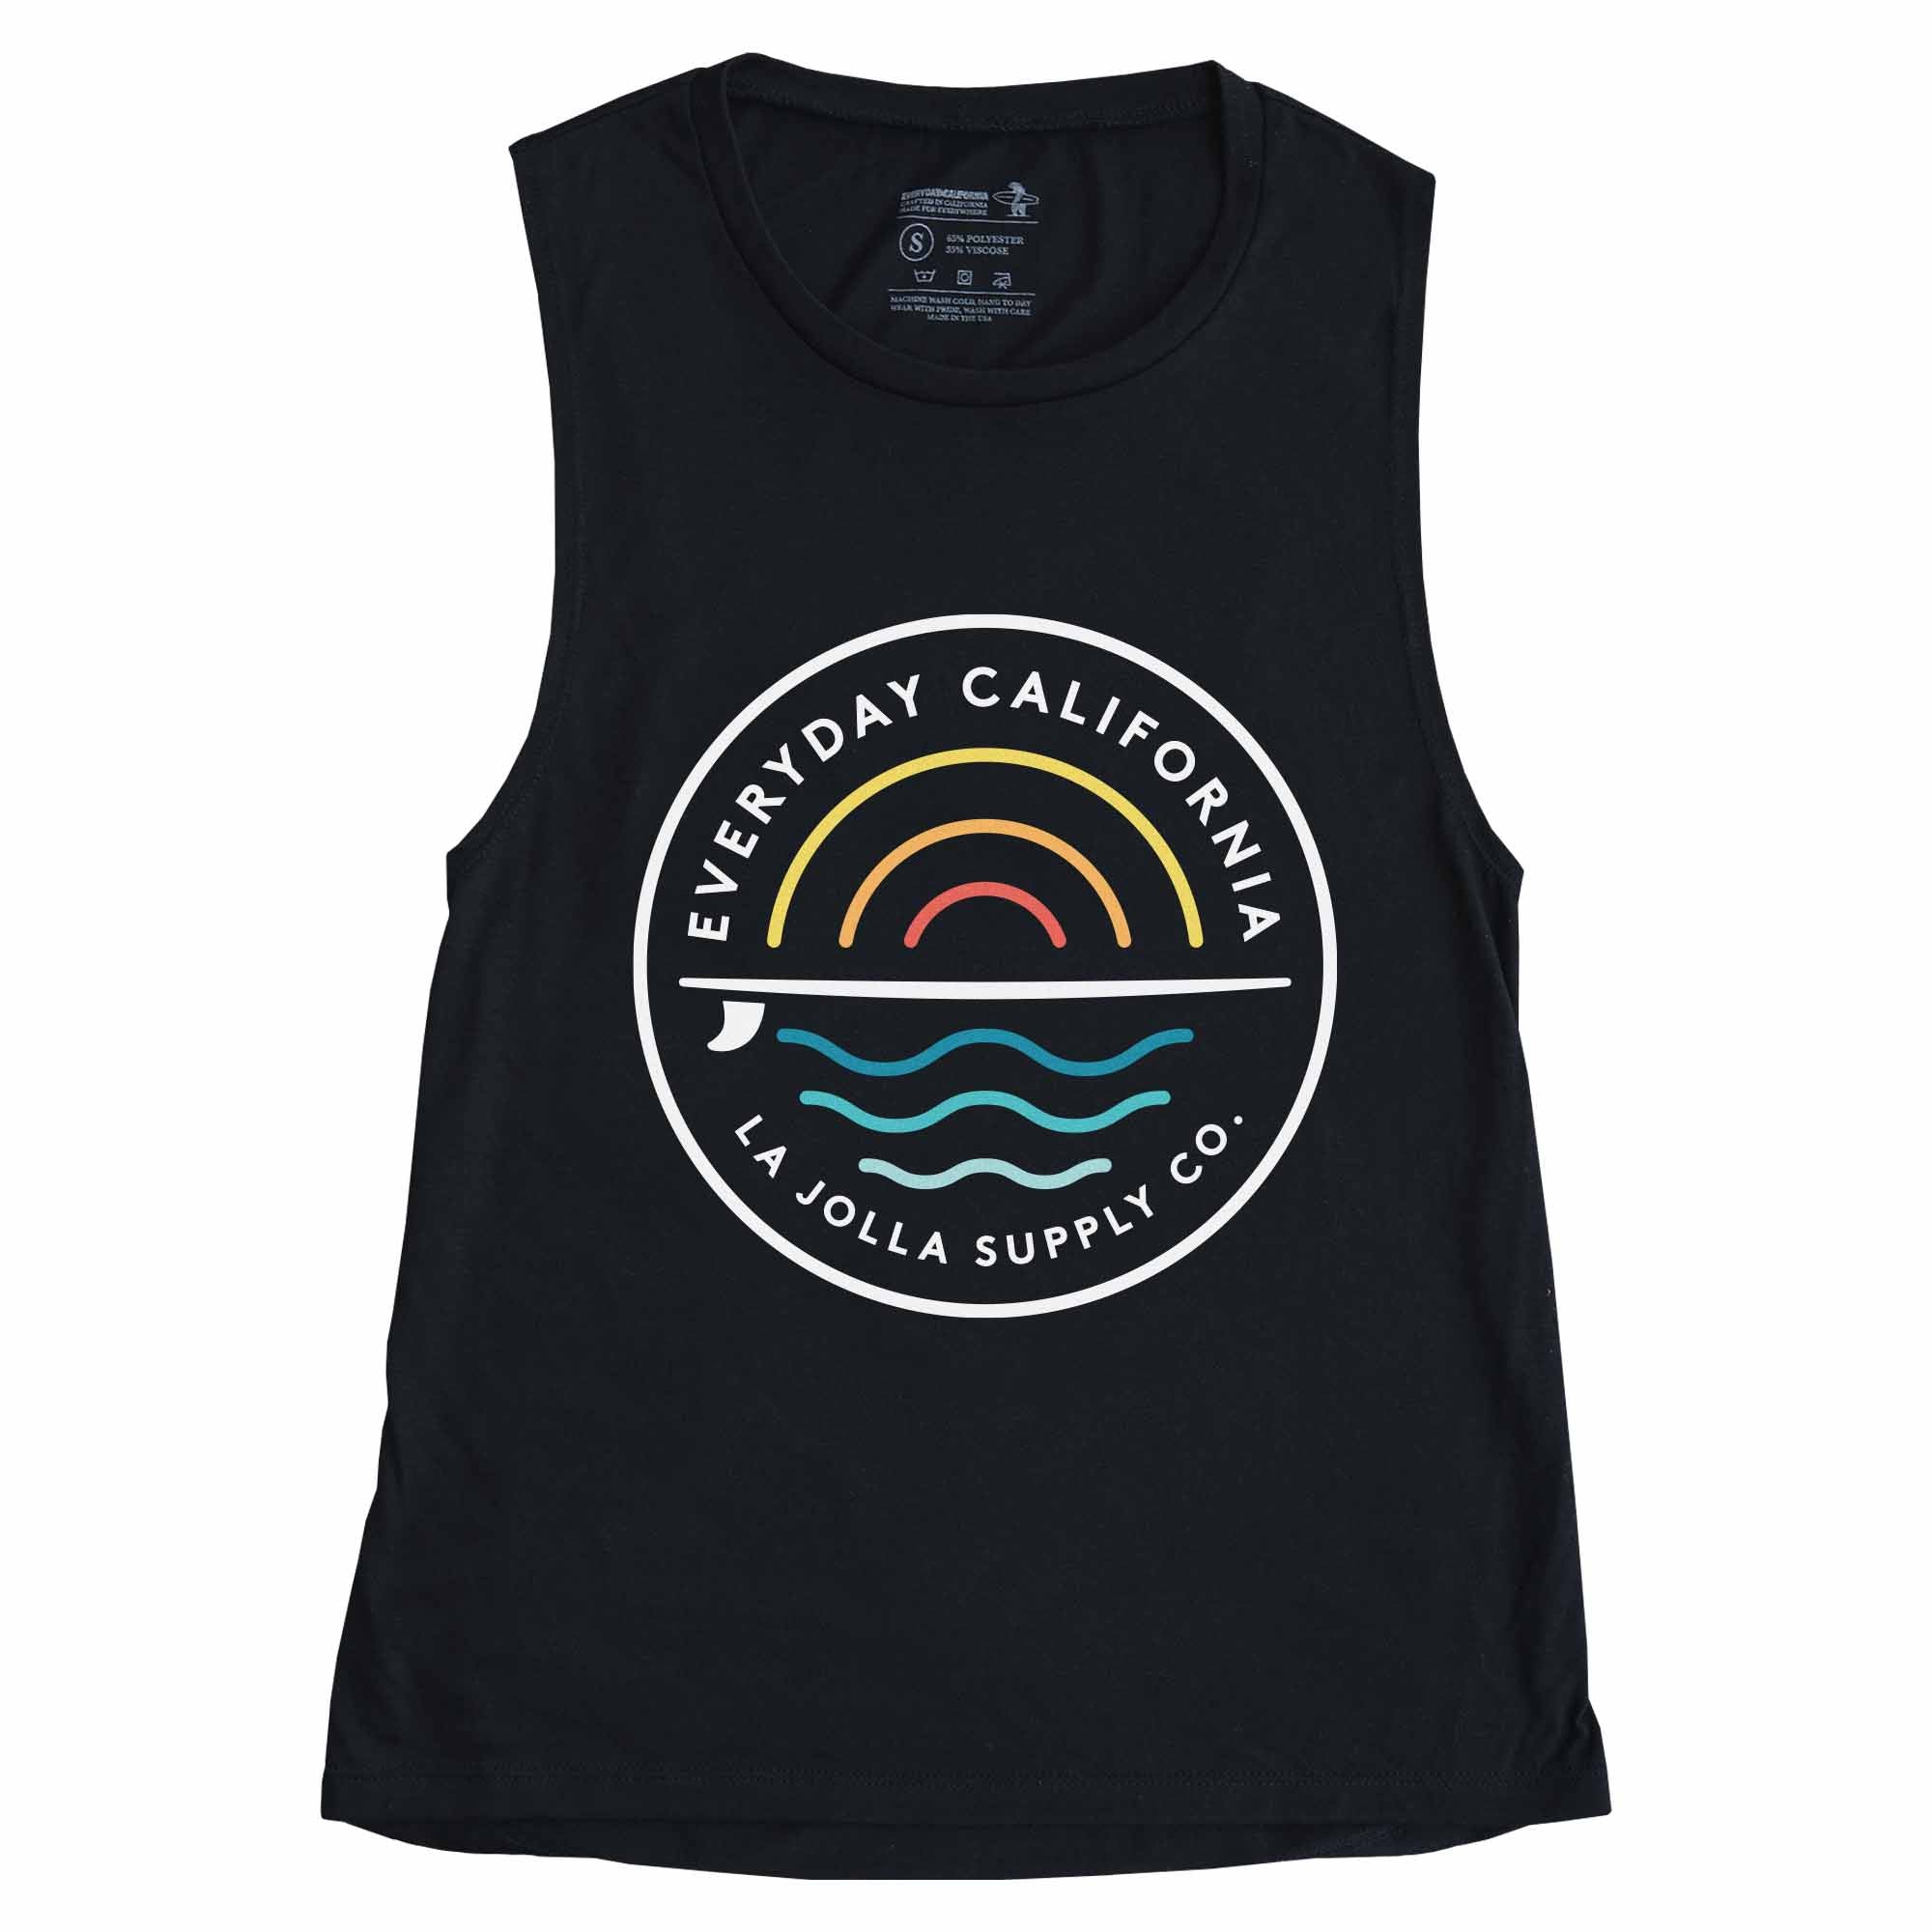 Our best selling Cabrillo tank. Pretend that summer never has to end with this relaxed tank. Sun, surf and sea graphic on the front.